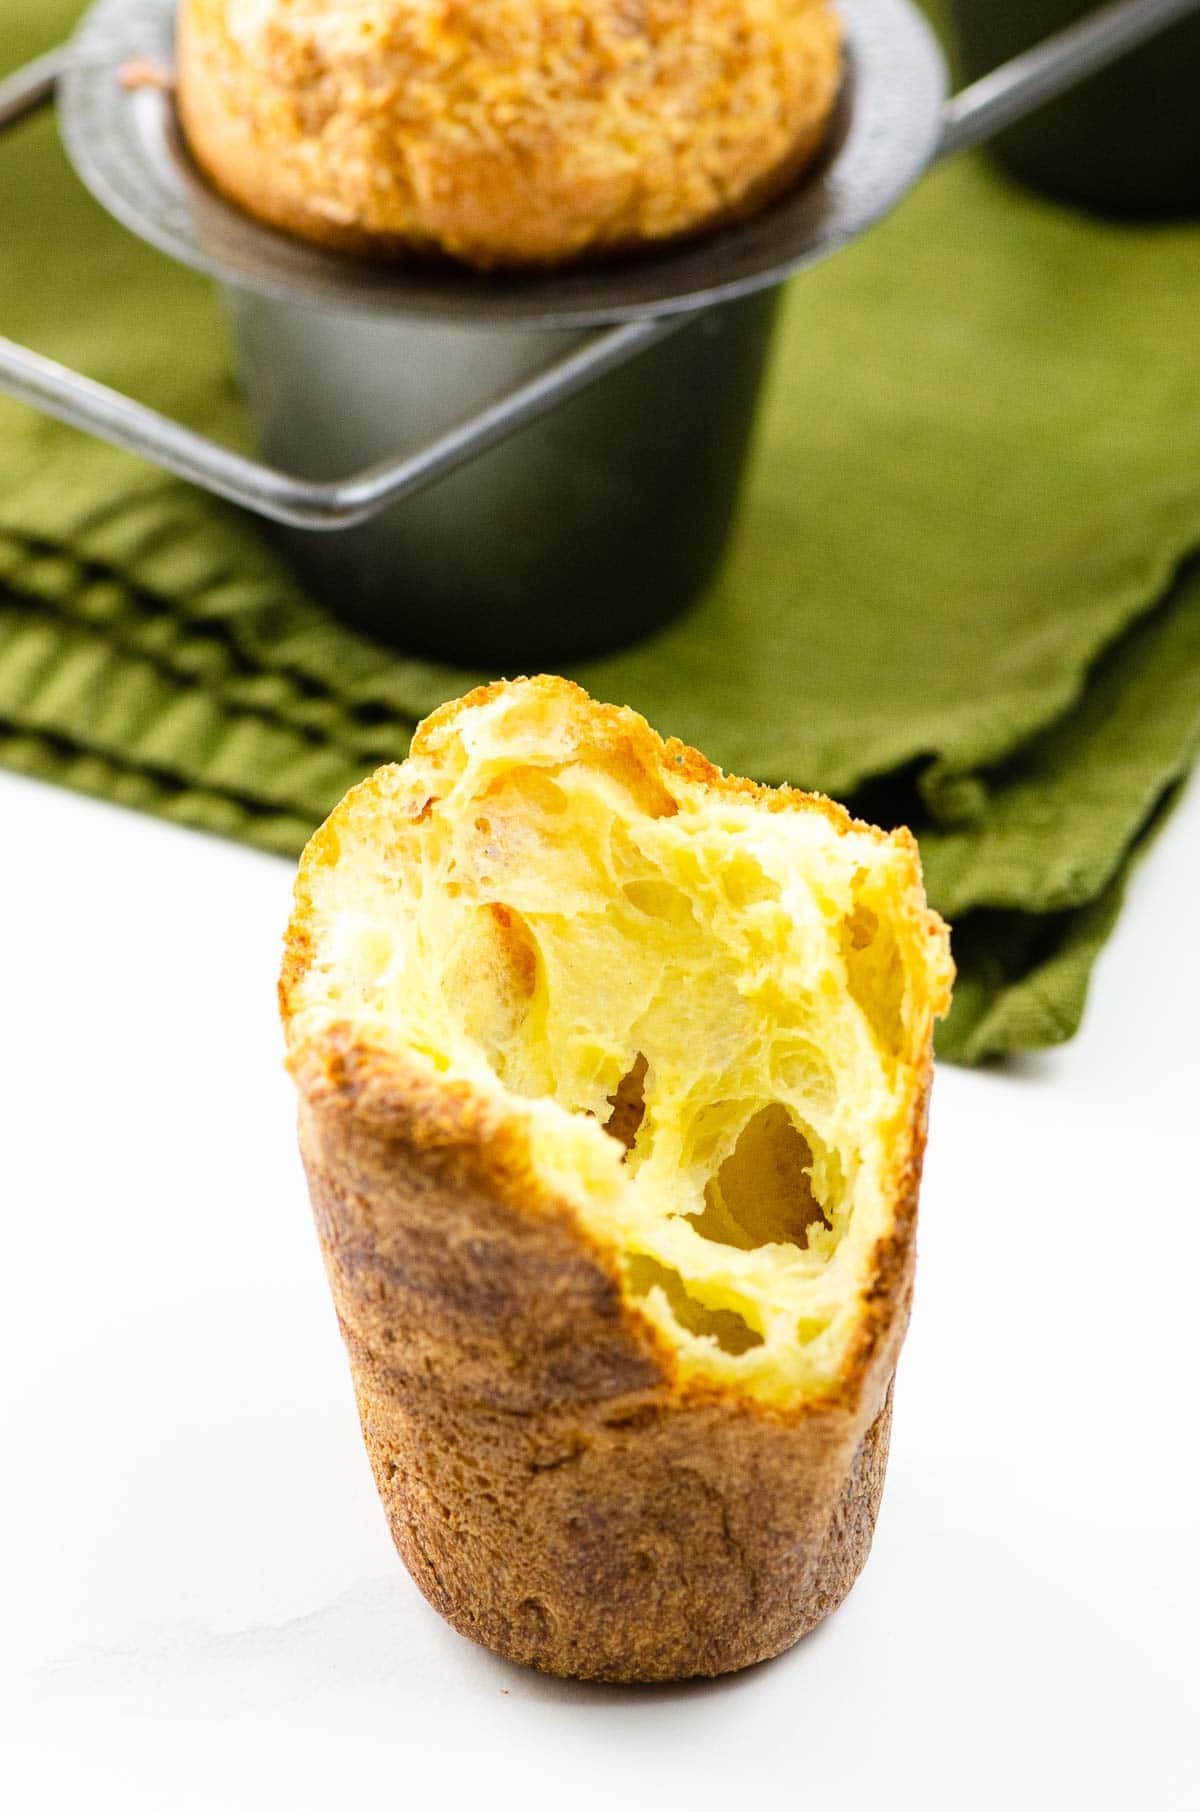 the inside of a popover